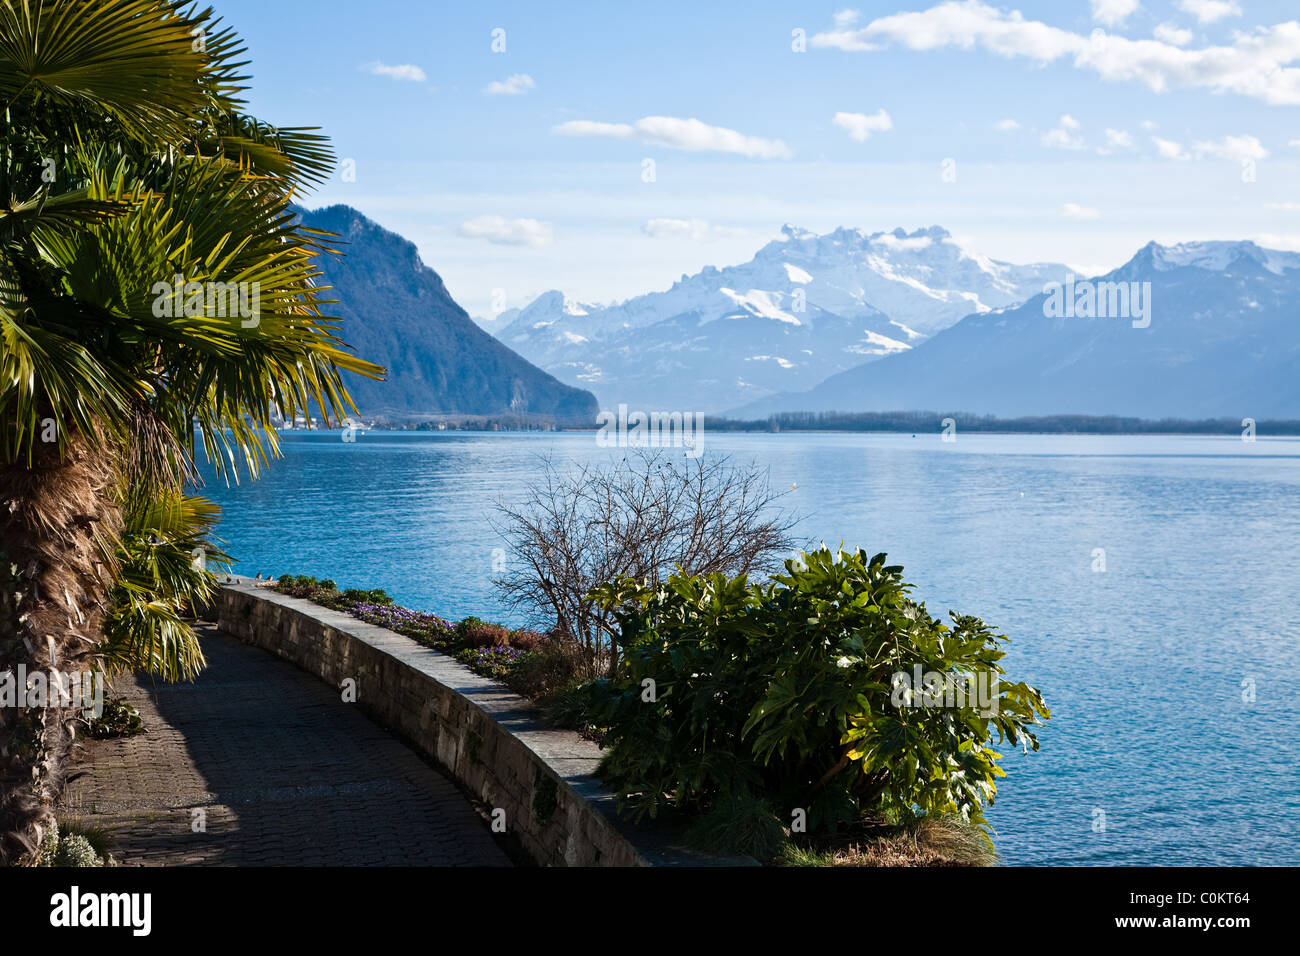 A view of the Swiss Alps across Lake Geneva from Montreux, Switzerland Stock Photo